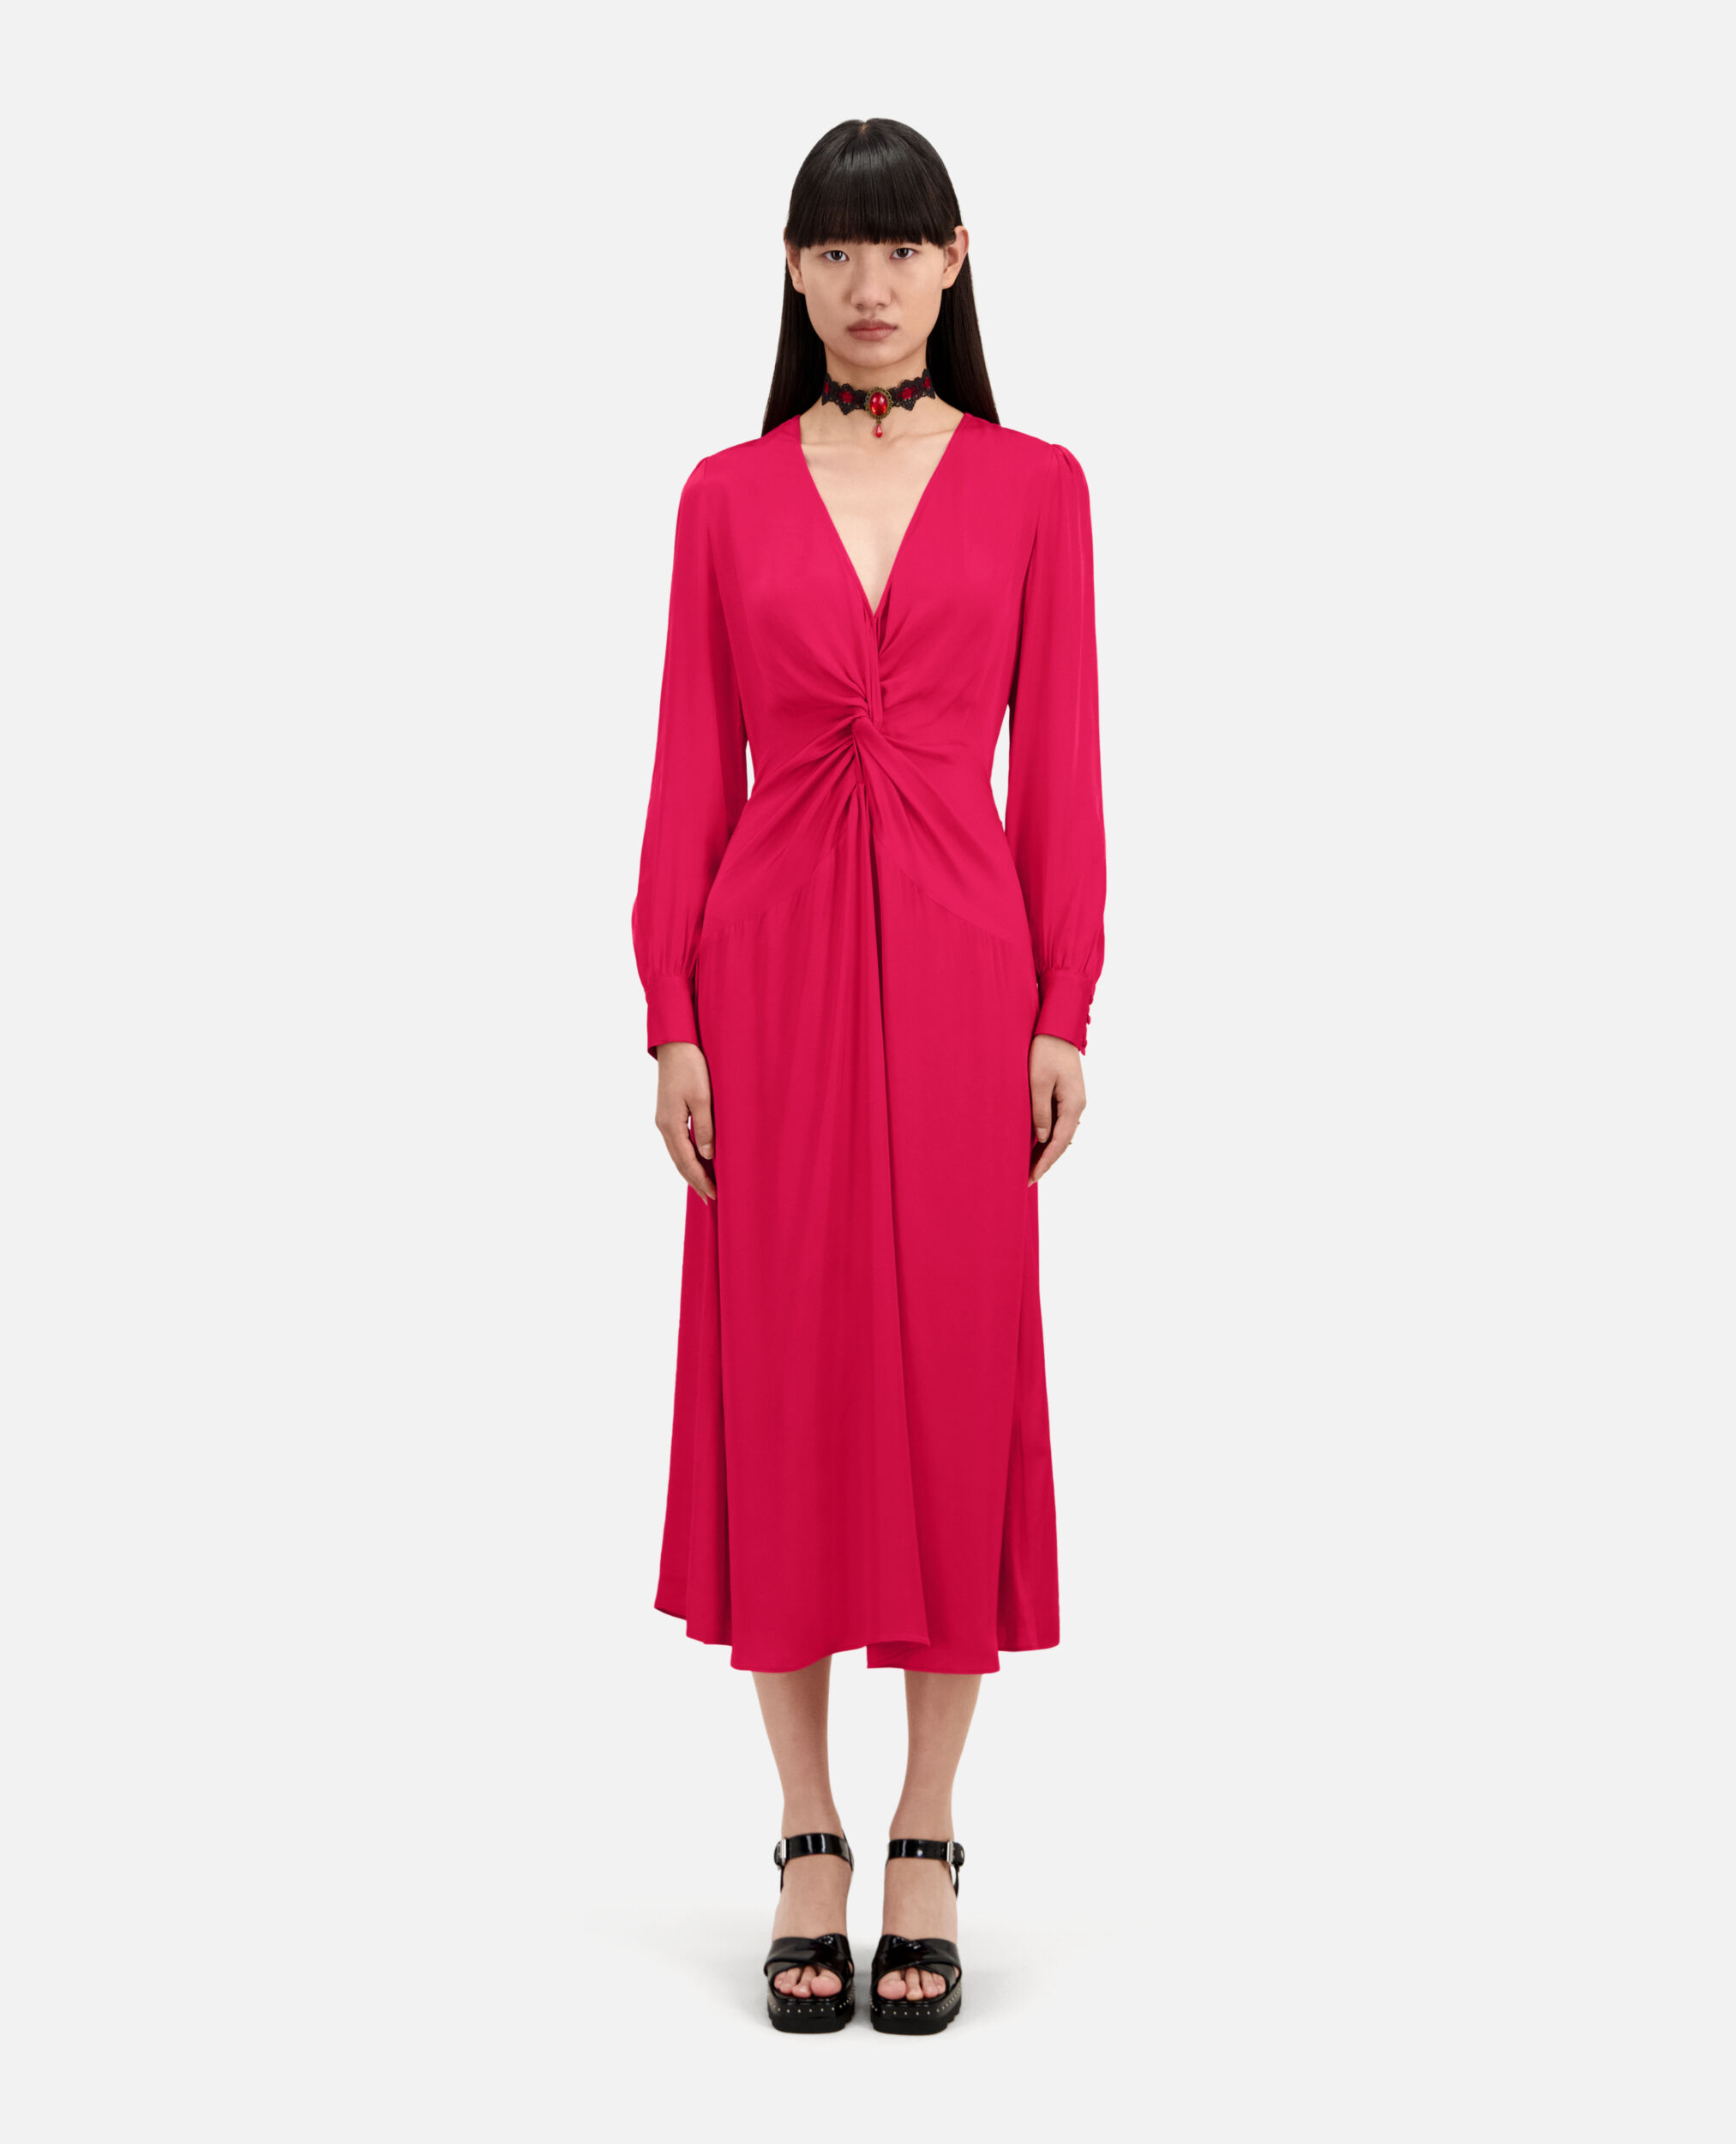 Robe longue rouge avec nœud, CHERRY, hi-res image number null